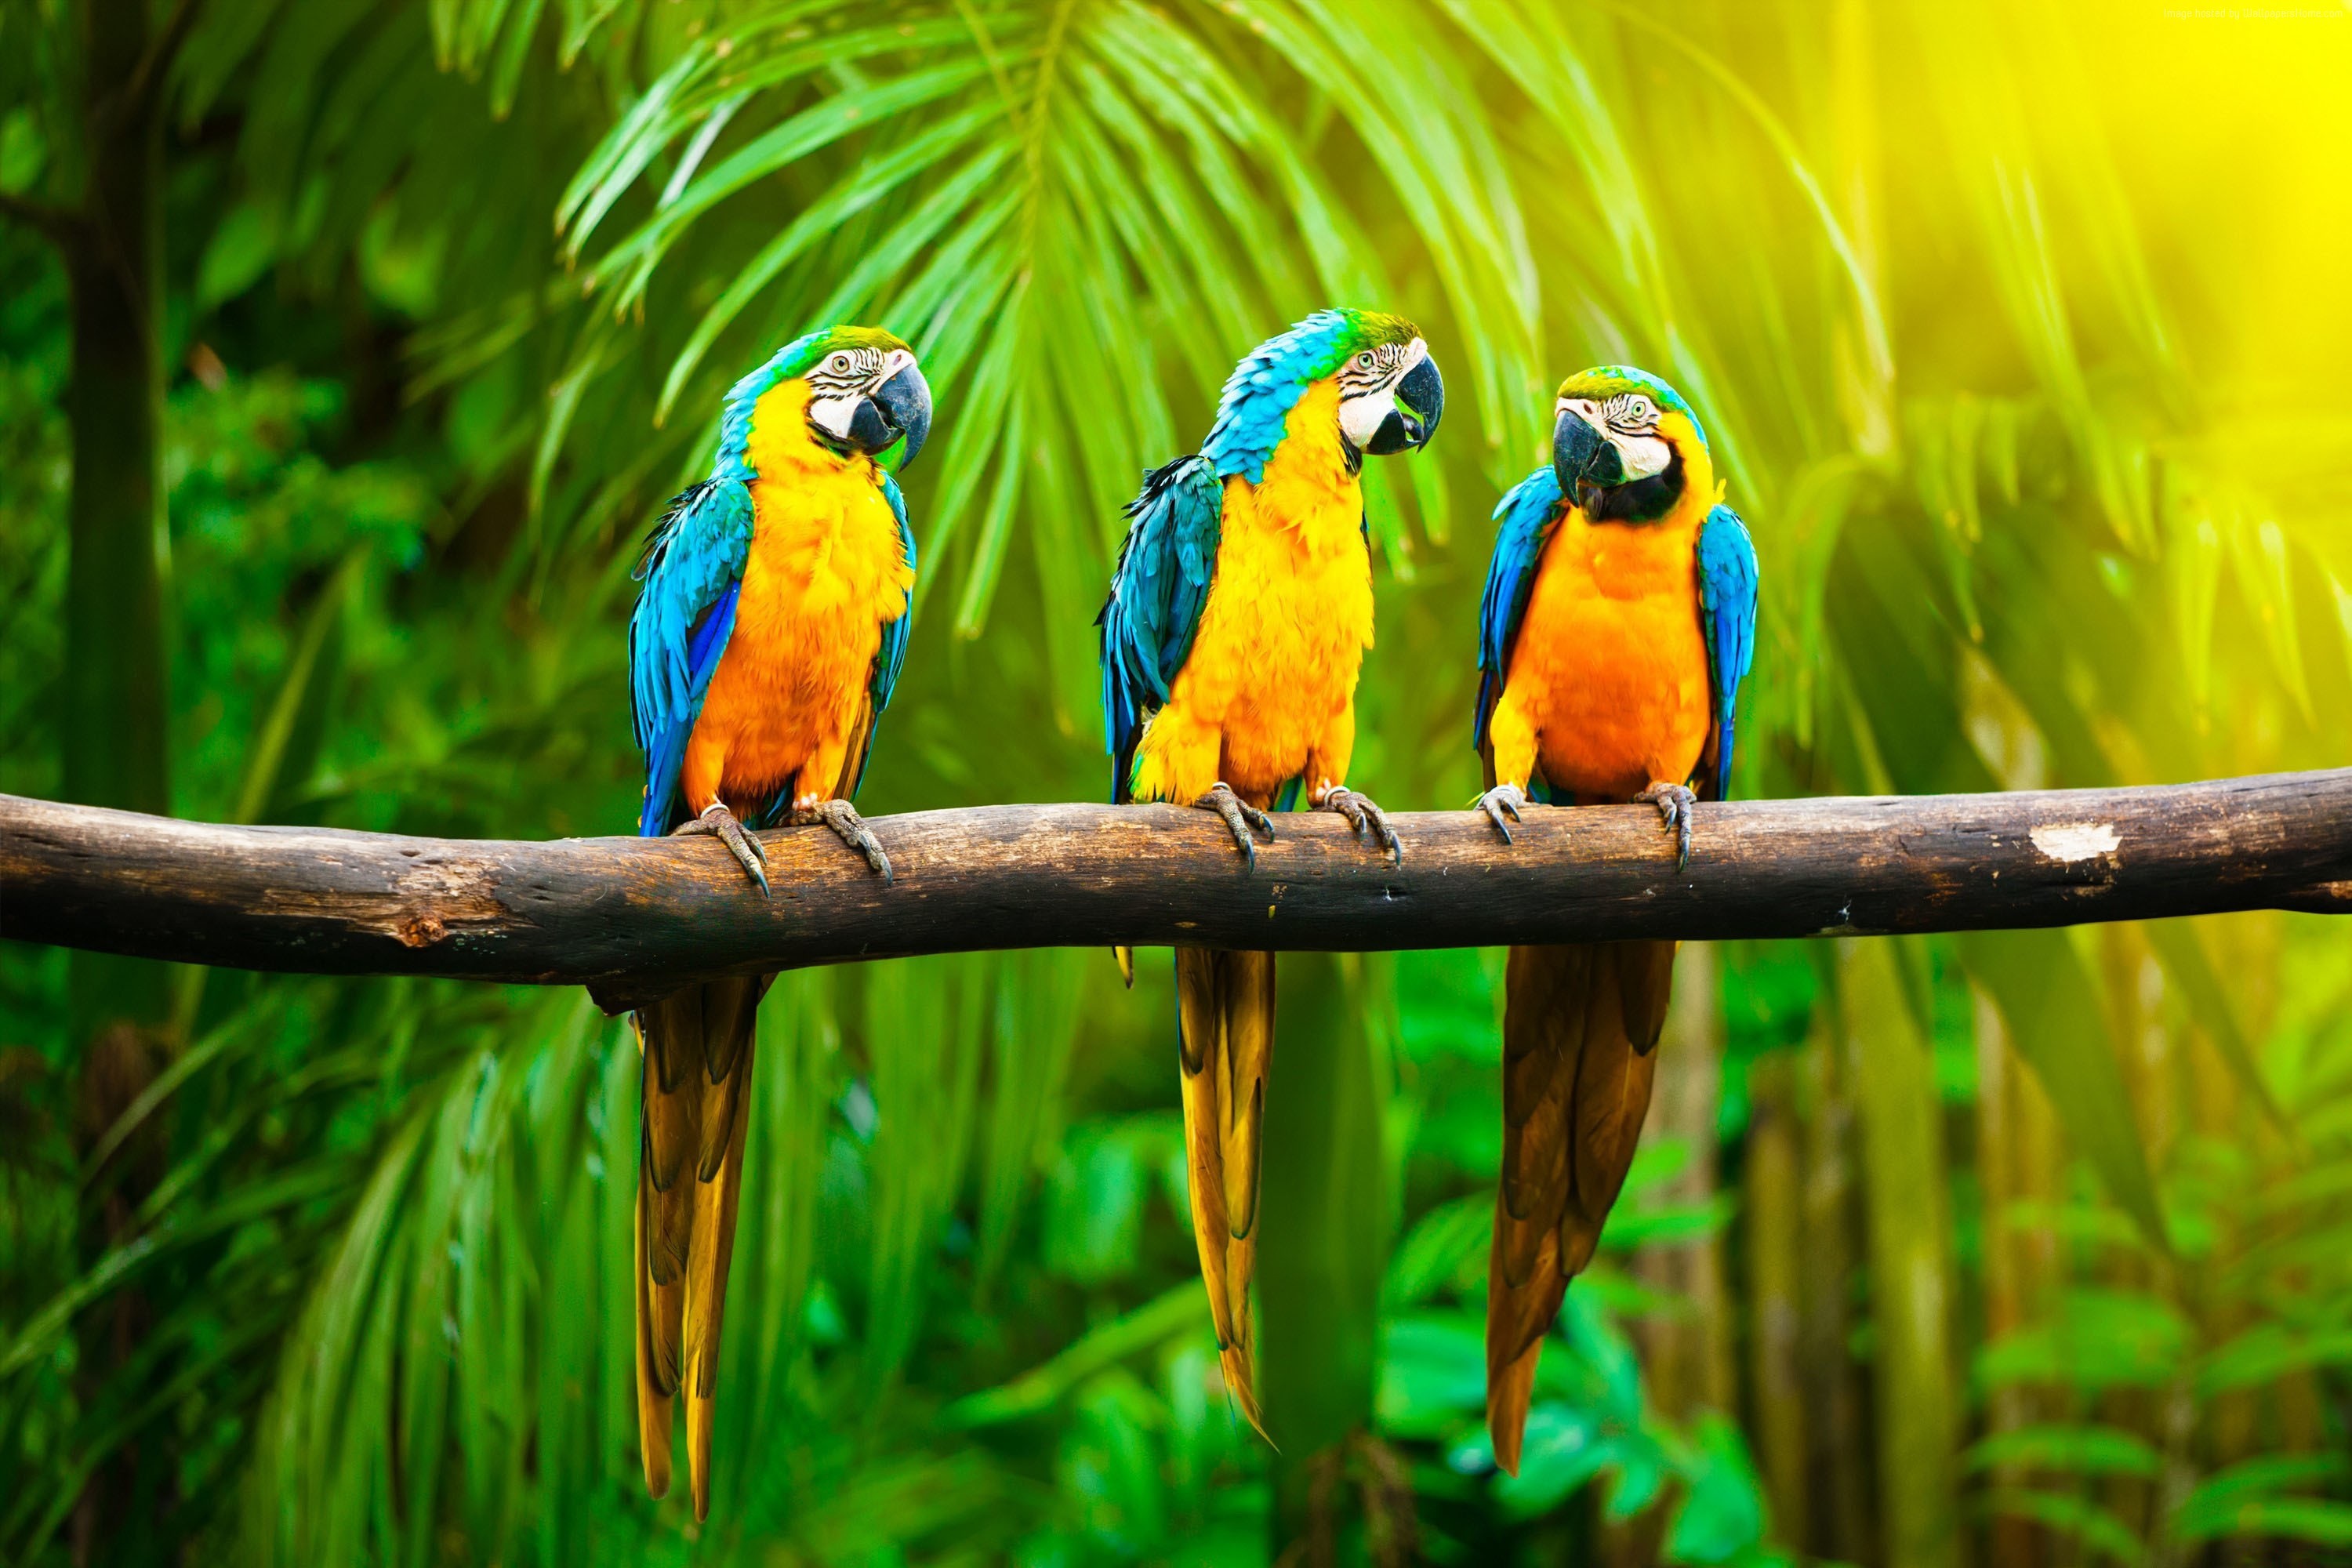 3000x2000 Your Resolution: 1024x1024. Available Resolutions: PC Mac Android iOS  Custom. Tags: Macaw, parrot ...